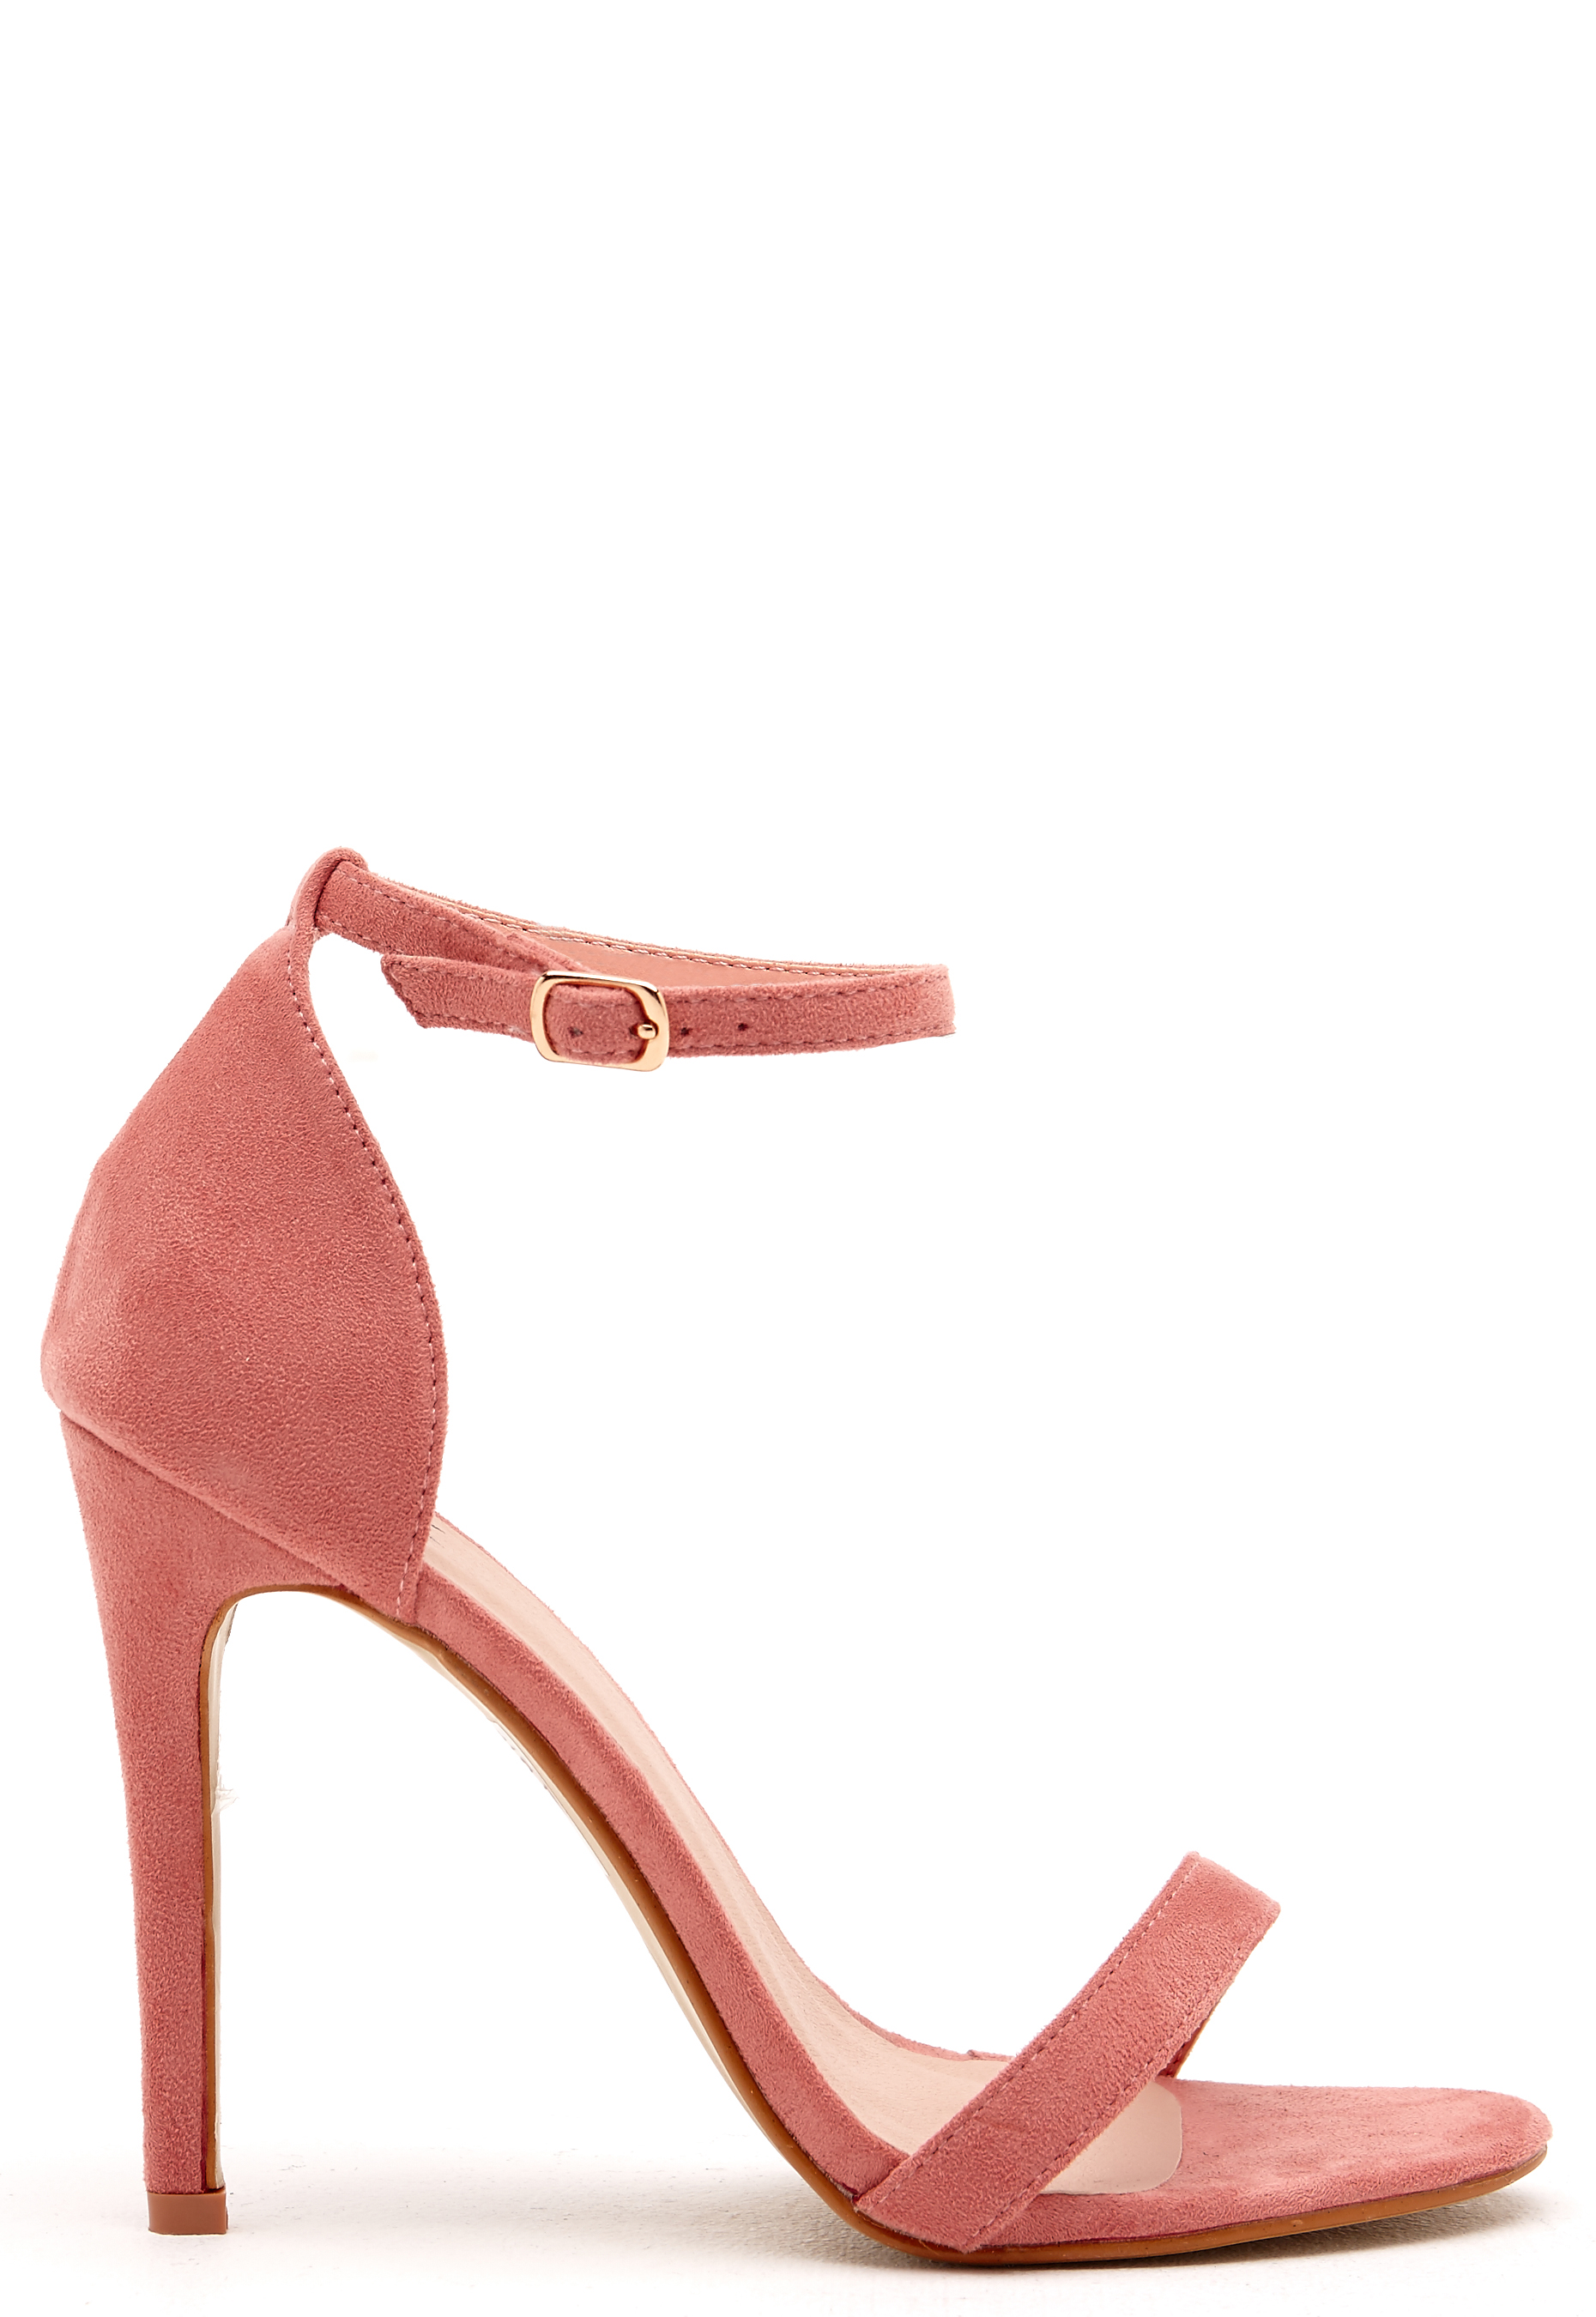 blush barely there heels